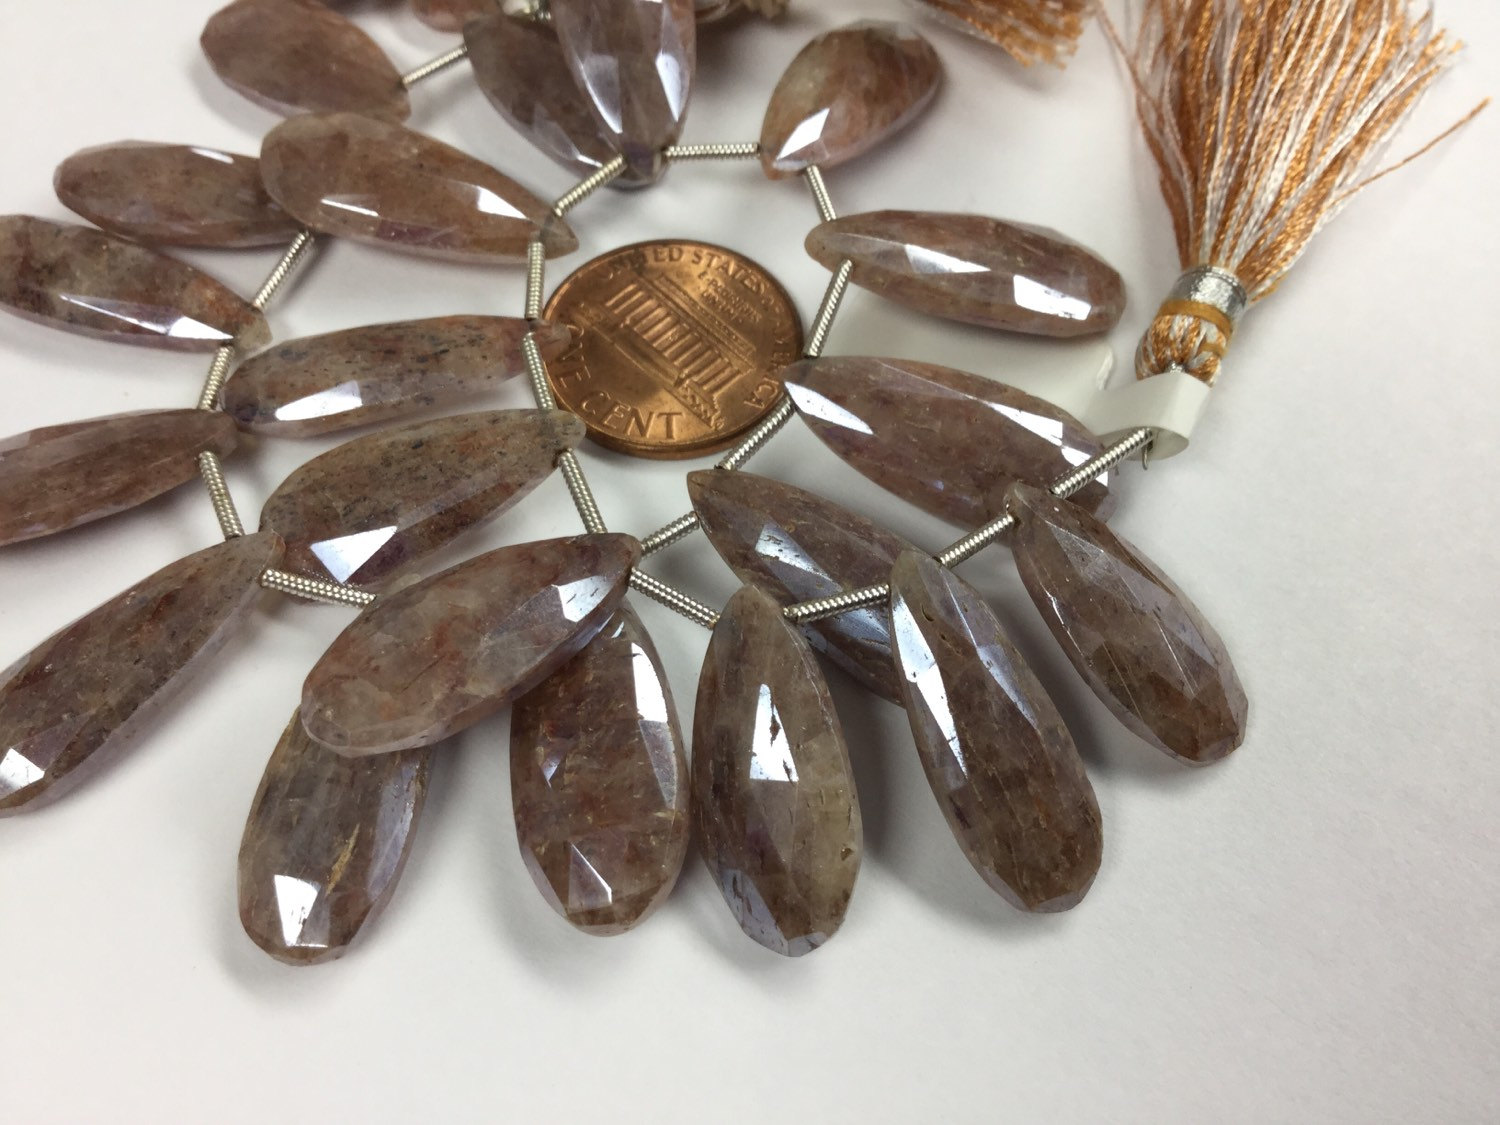 Brown Silverite Pears Faceted